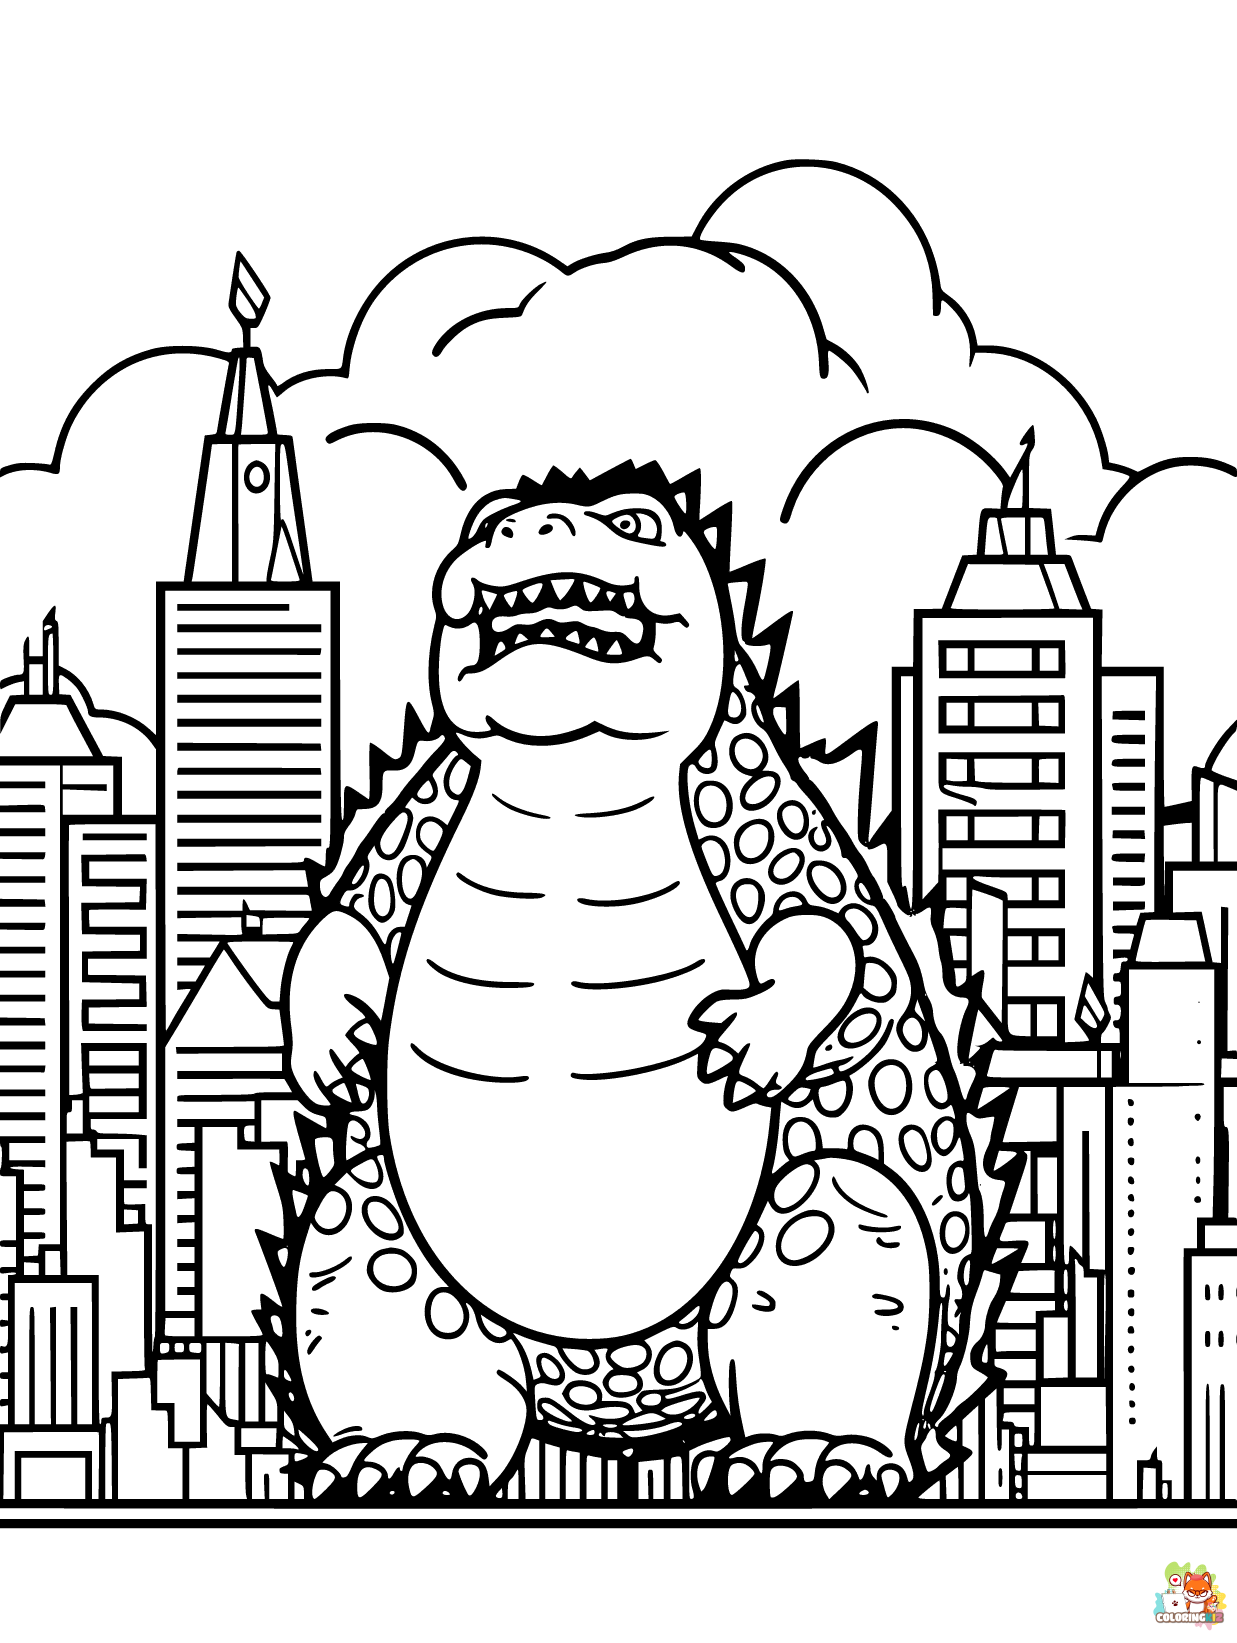 godzilla coloring pages to print